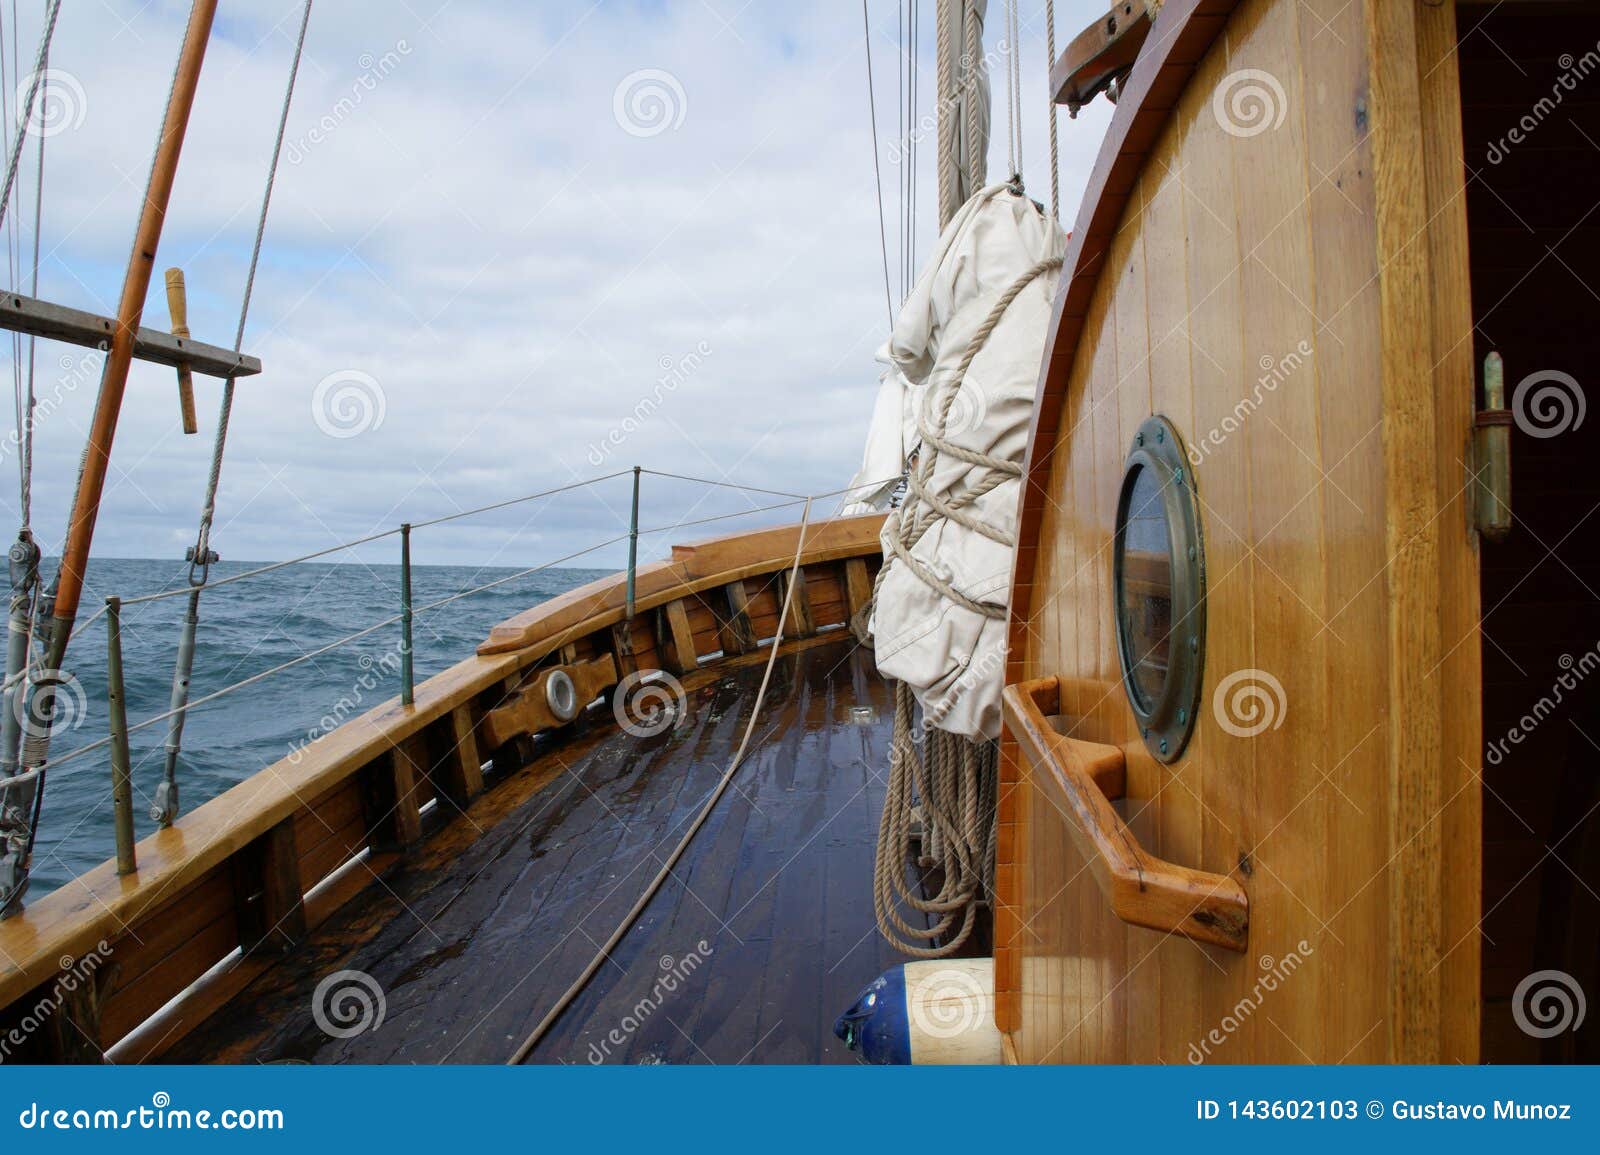 on board an ancient whaler sailing the skjalfandi bay in northern iceland